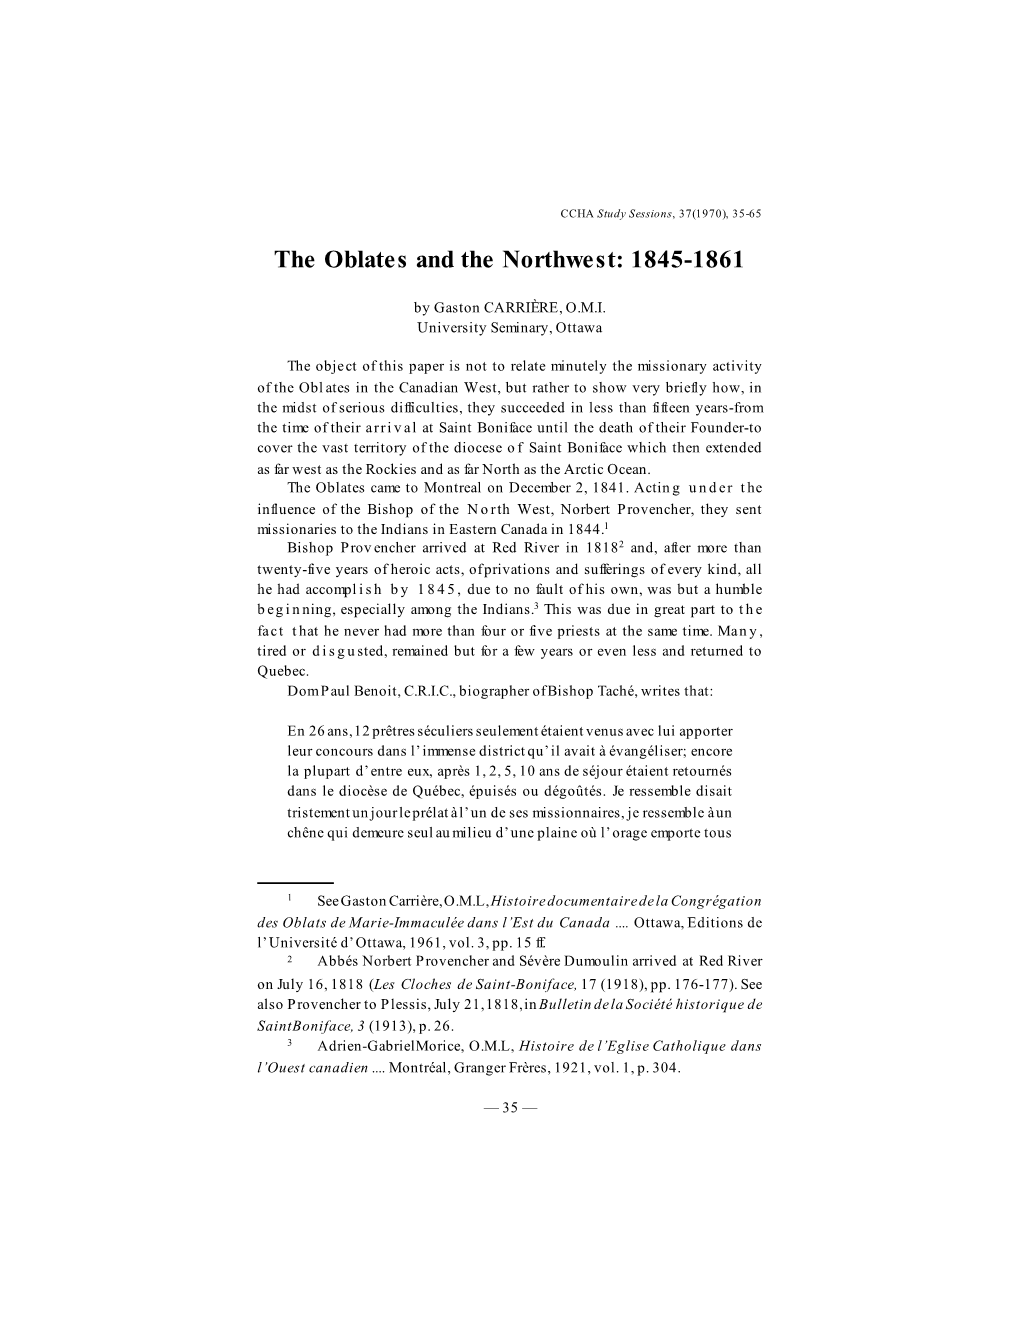 The Oblates and the Northwest: 1845-1861